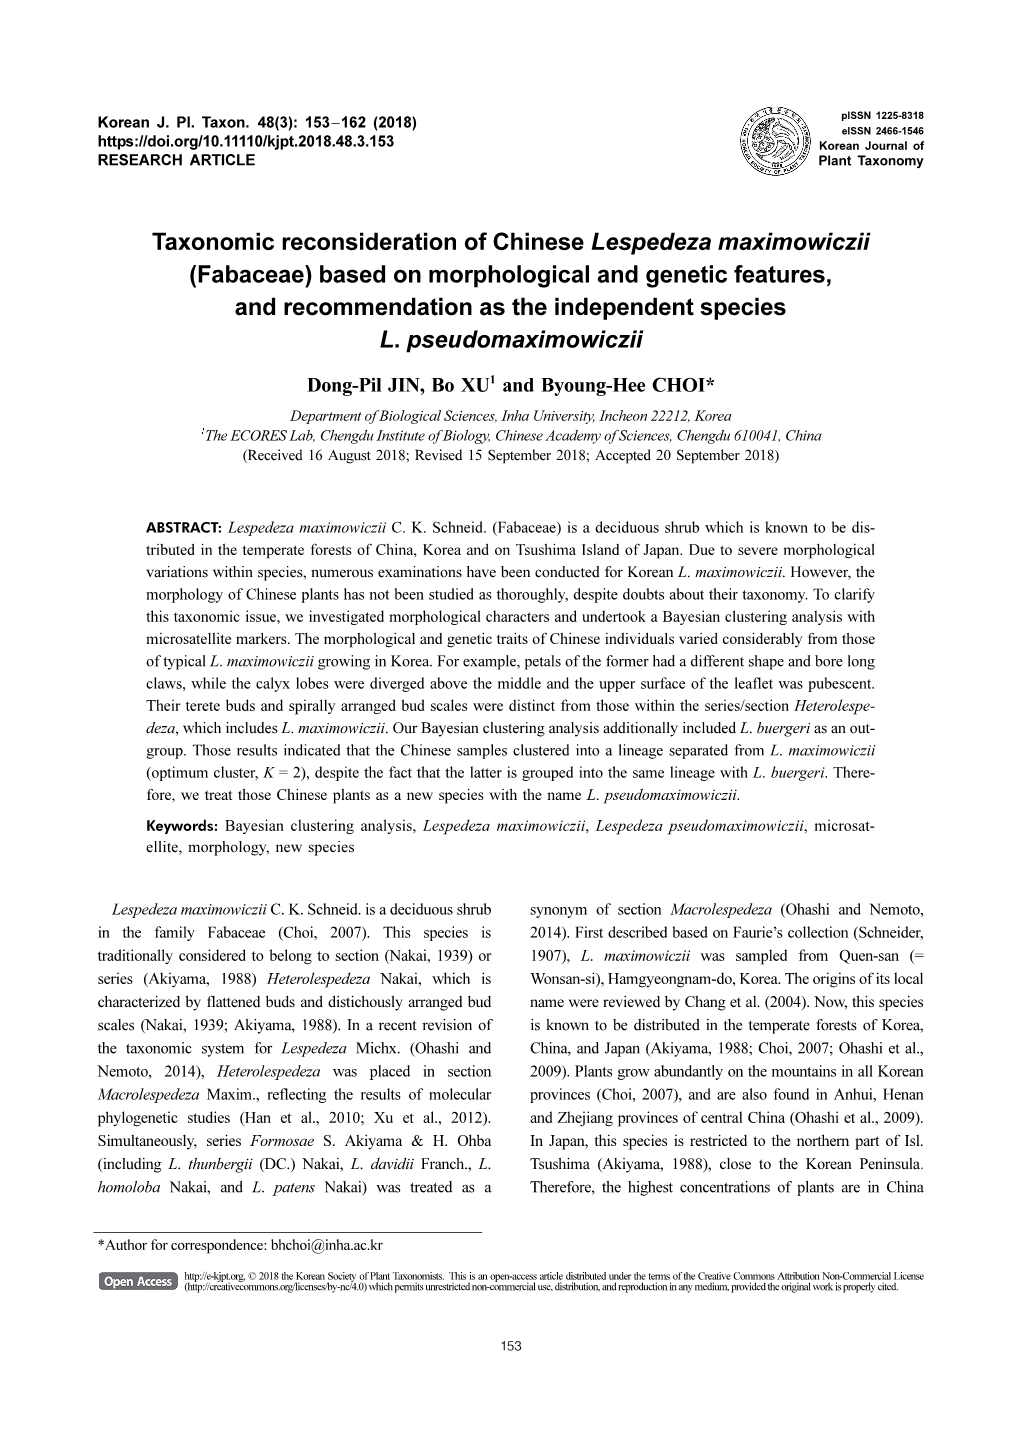 Taxonomic Reconsideration of Chinese Lespedeza Maximowiczii (Fabaceae) Based on Morphological and Genetic Features, and Recommendation As the Independent Species L